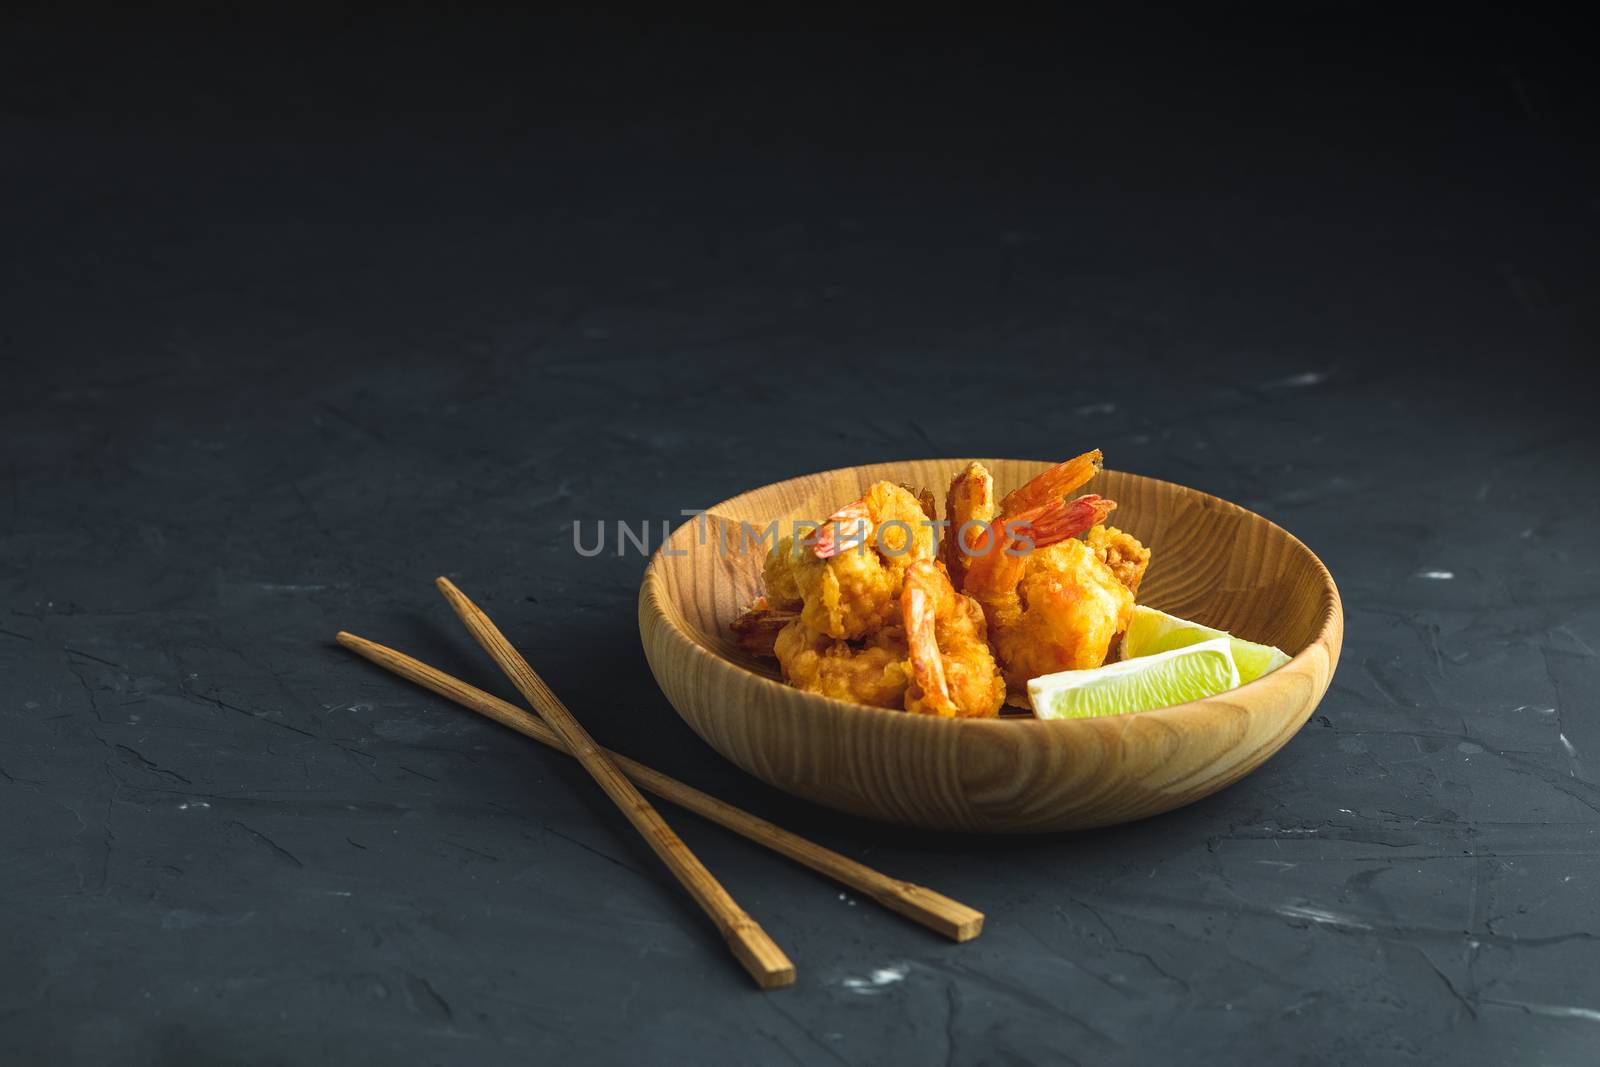 Fried Shrimps tempura with lime in wooden plate on dark concrete surface background. Copy space for you text. Seafood tempura dish served japanese or eastern Asia style with chopsticks.